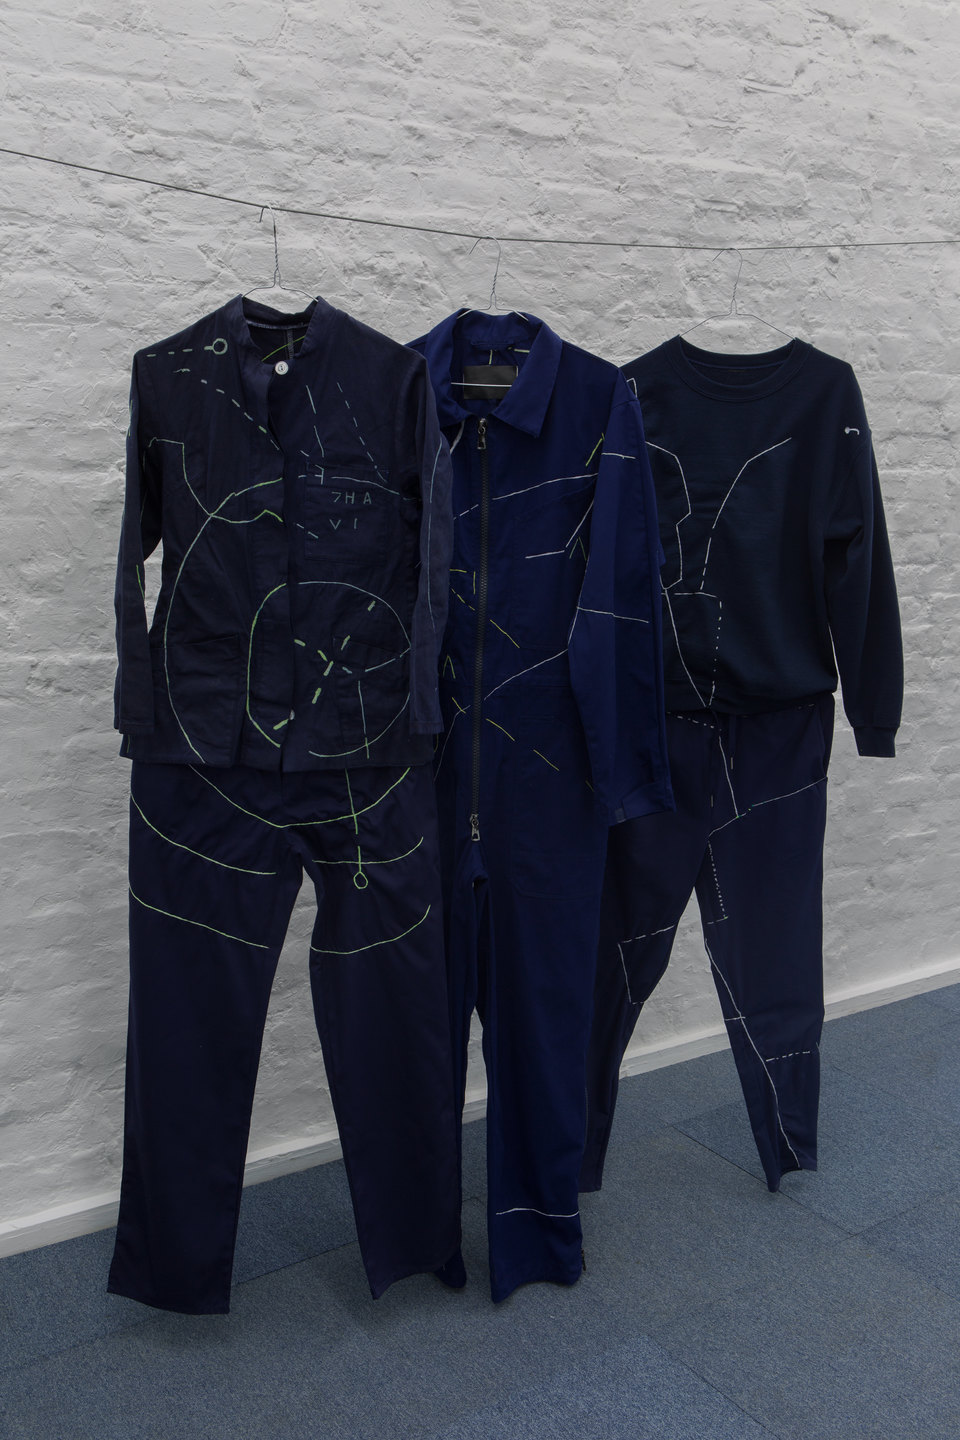 Angharad Williams and Mathis Gasser, 'Navigator Suits' (detail), 2018, Hergest:Nant, Cell Project Space